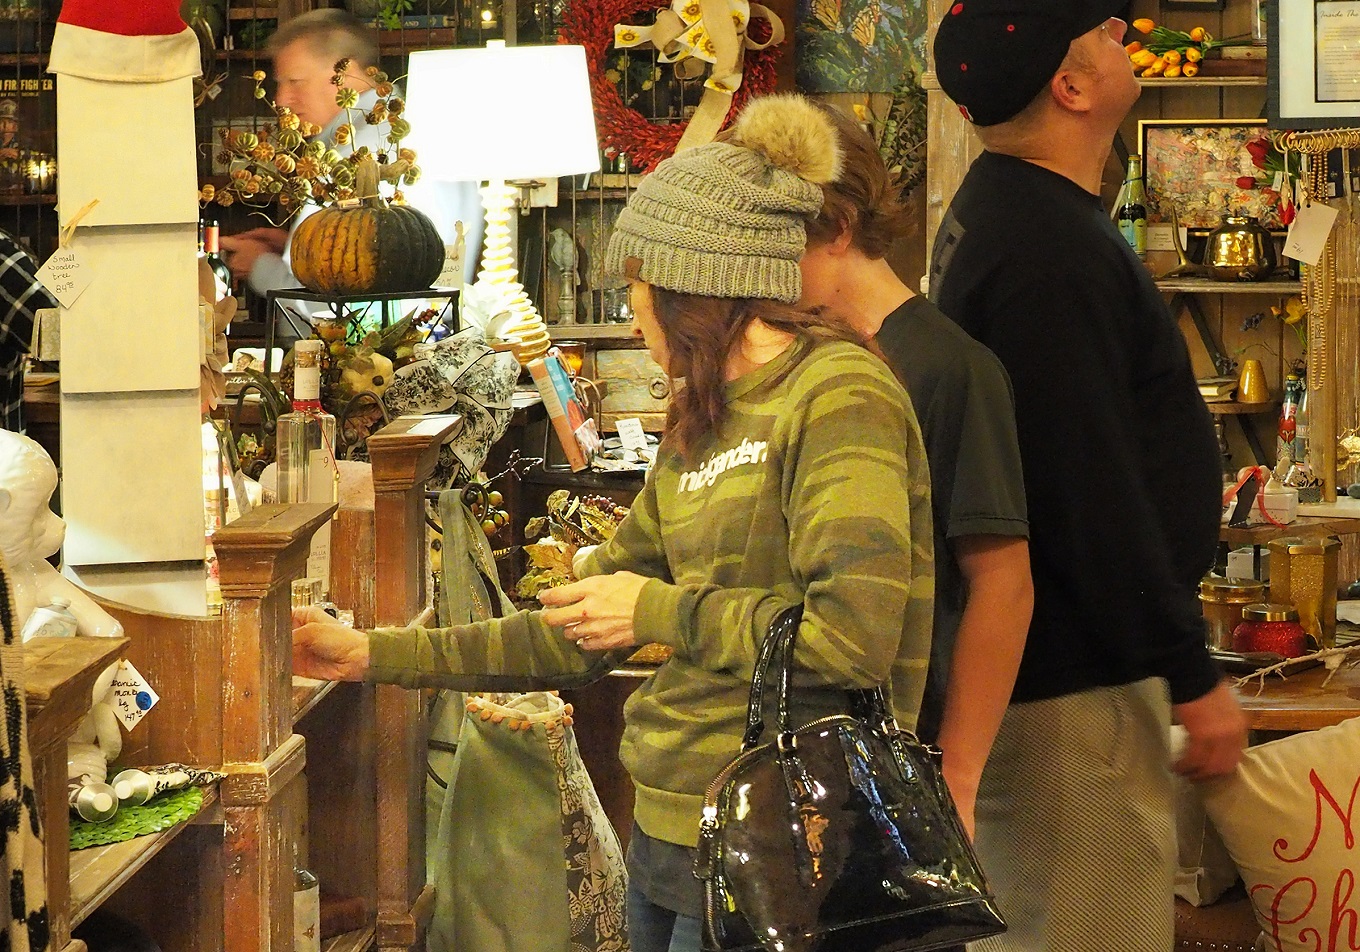 Woman wearing beanie examines items for sale in a shop decorated for Christmas